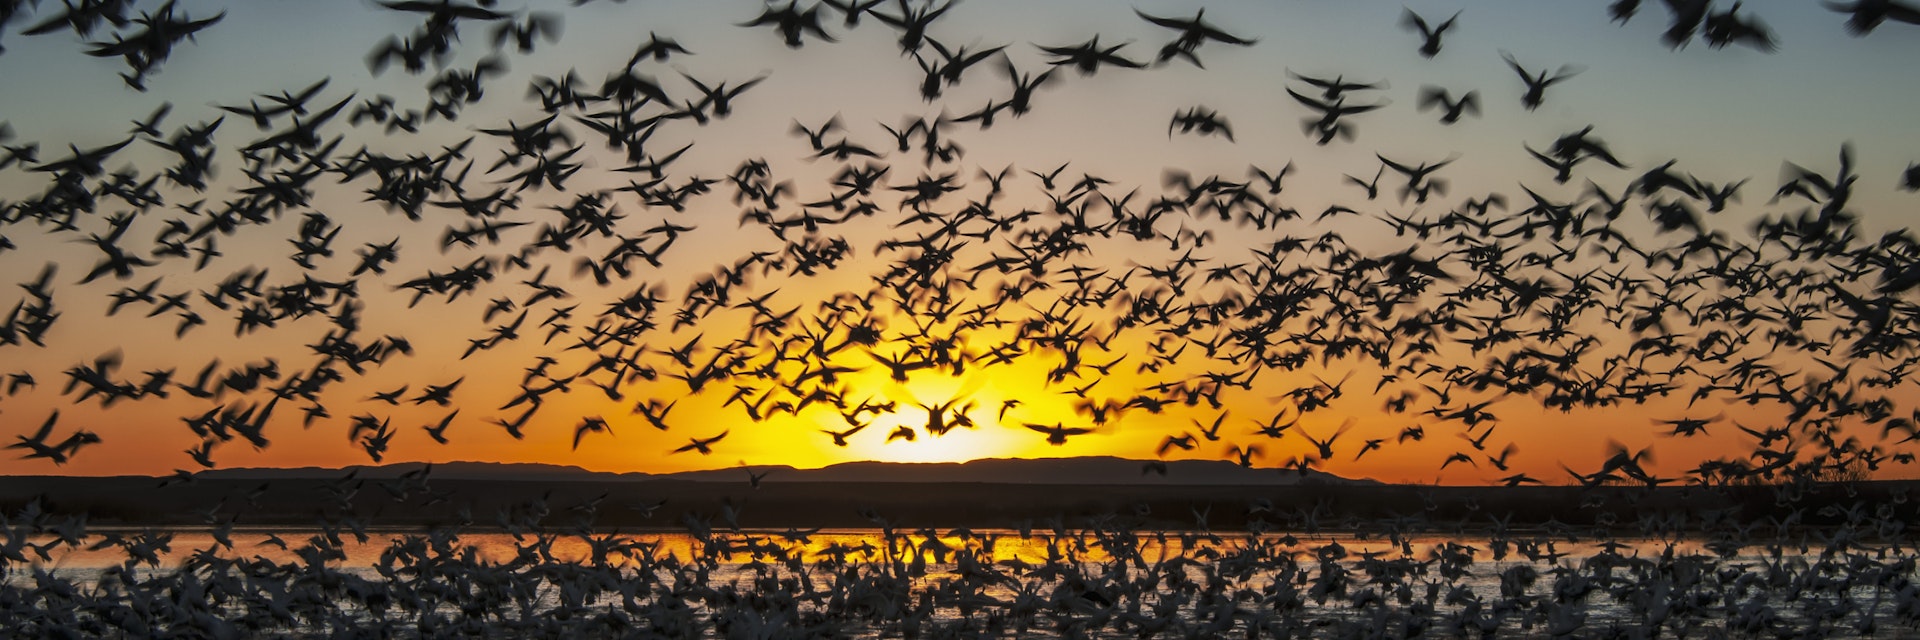 Snow geese take flight at sunrise in Bosque del Apache National Wildlife Refuge.
